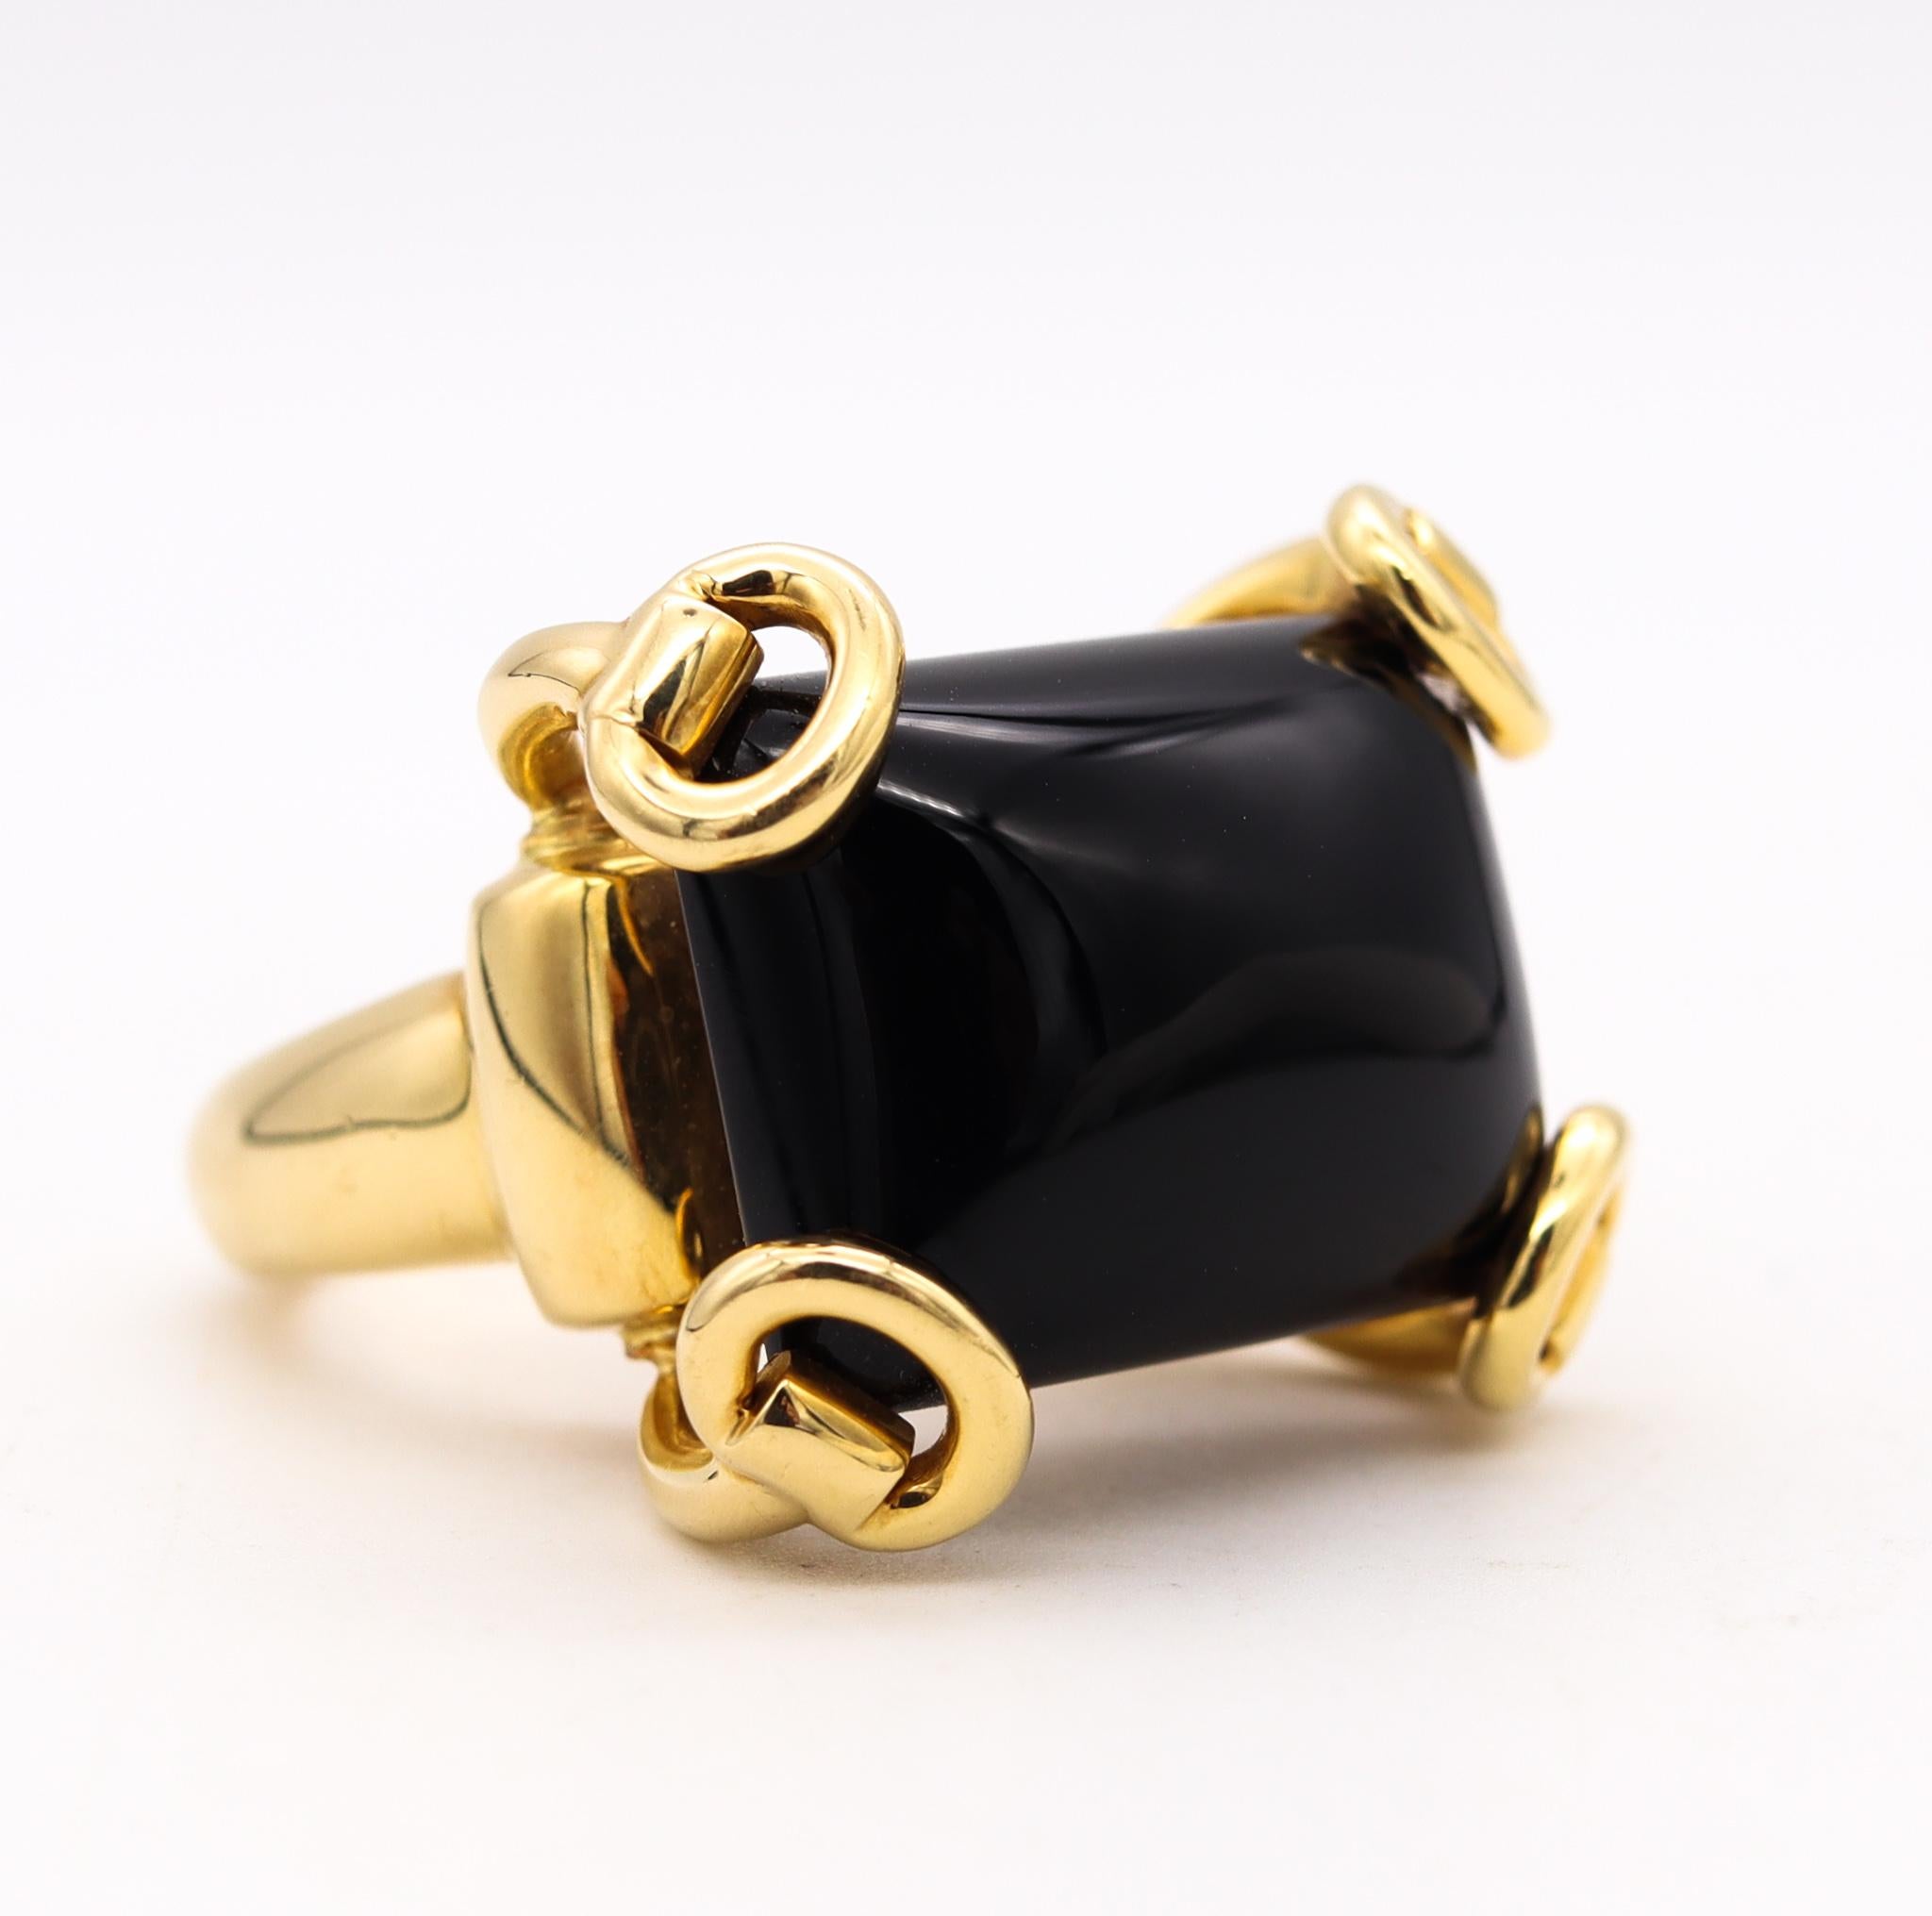 Women's or Men's Gucci Milano Horsebit Cocktail Ring in 18Kt Yellow Gold with 26 Cts Black Onyx